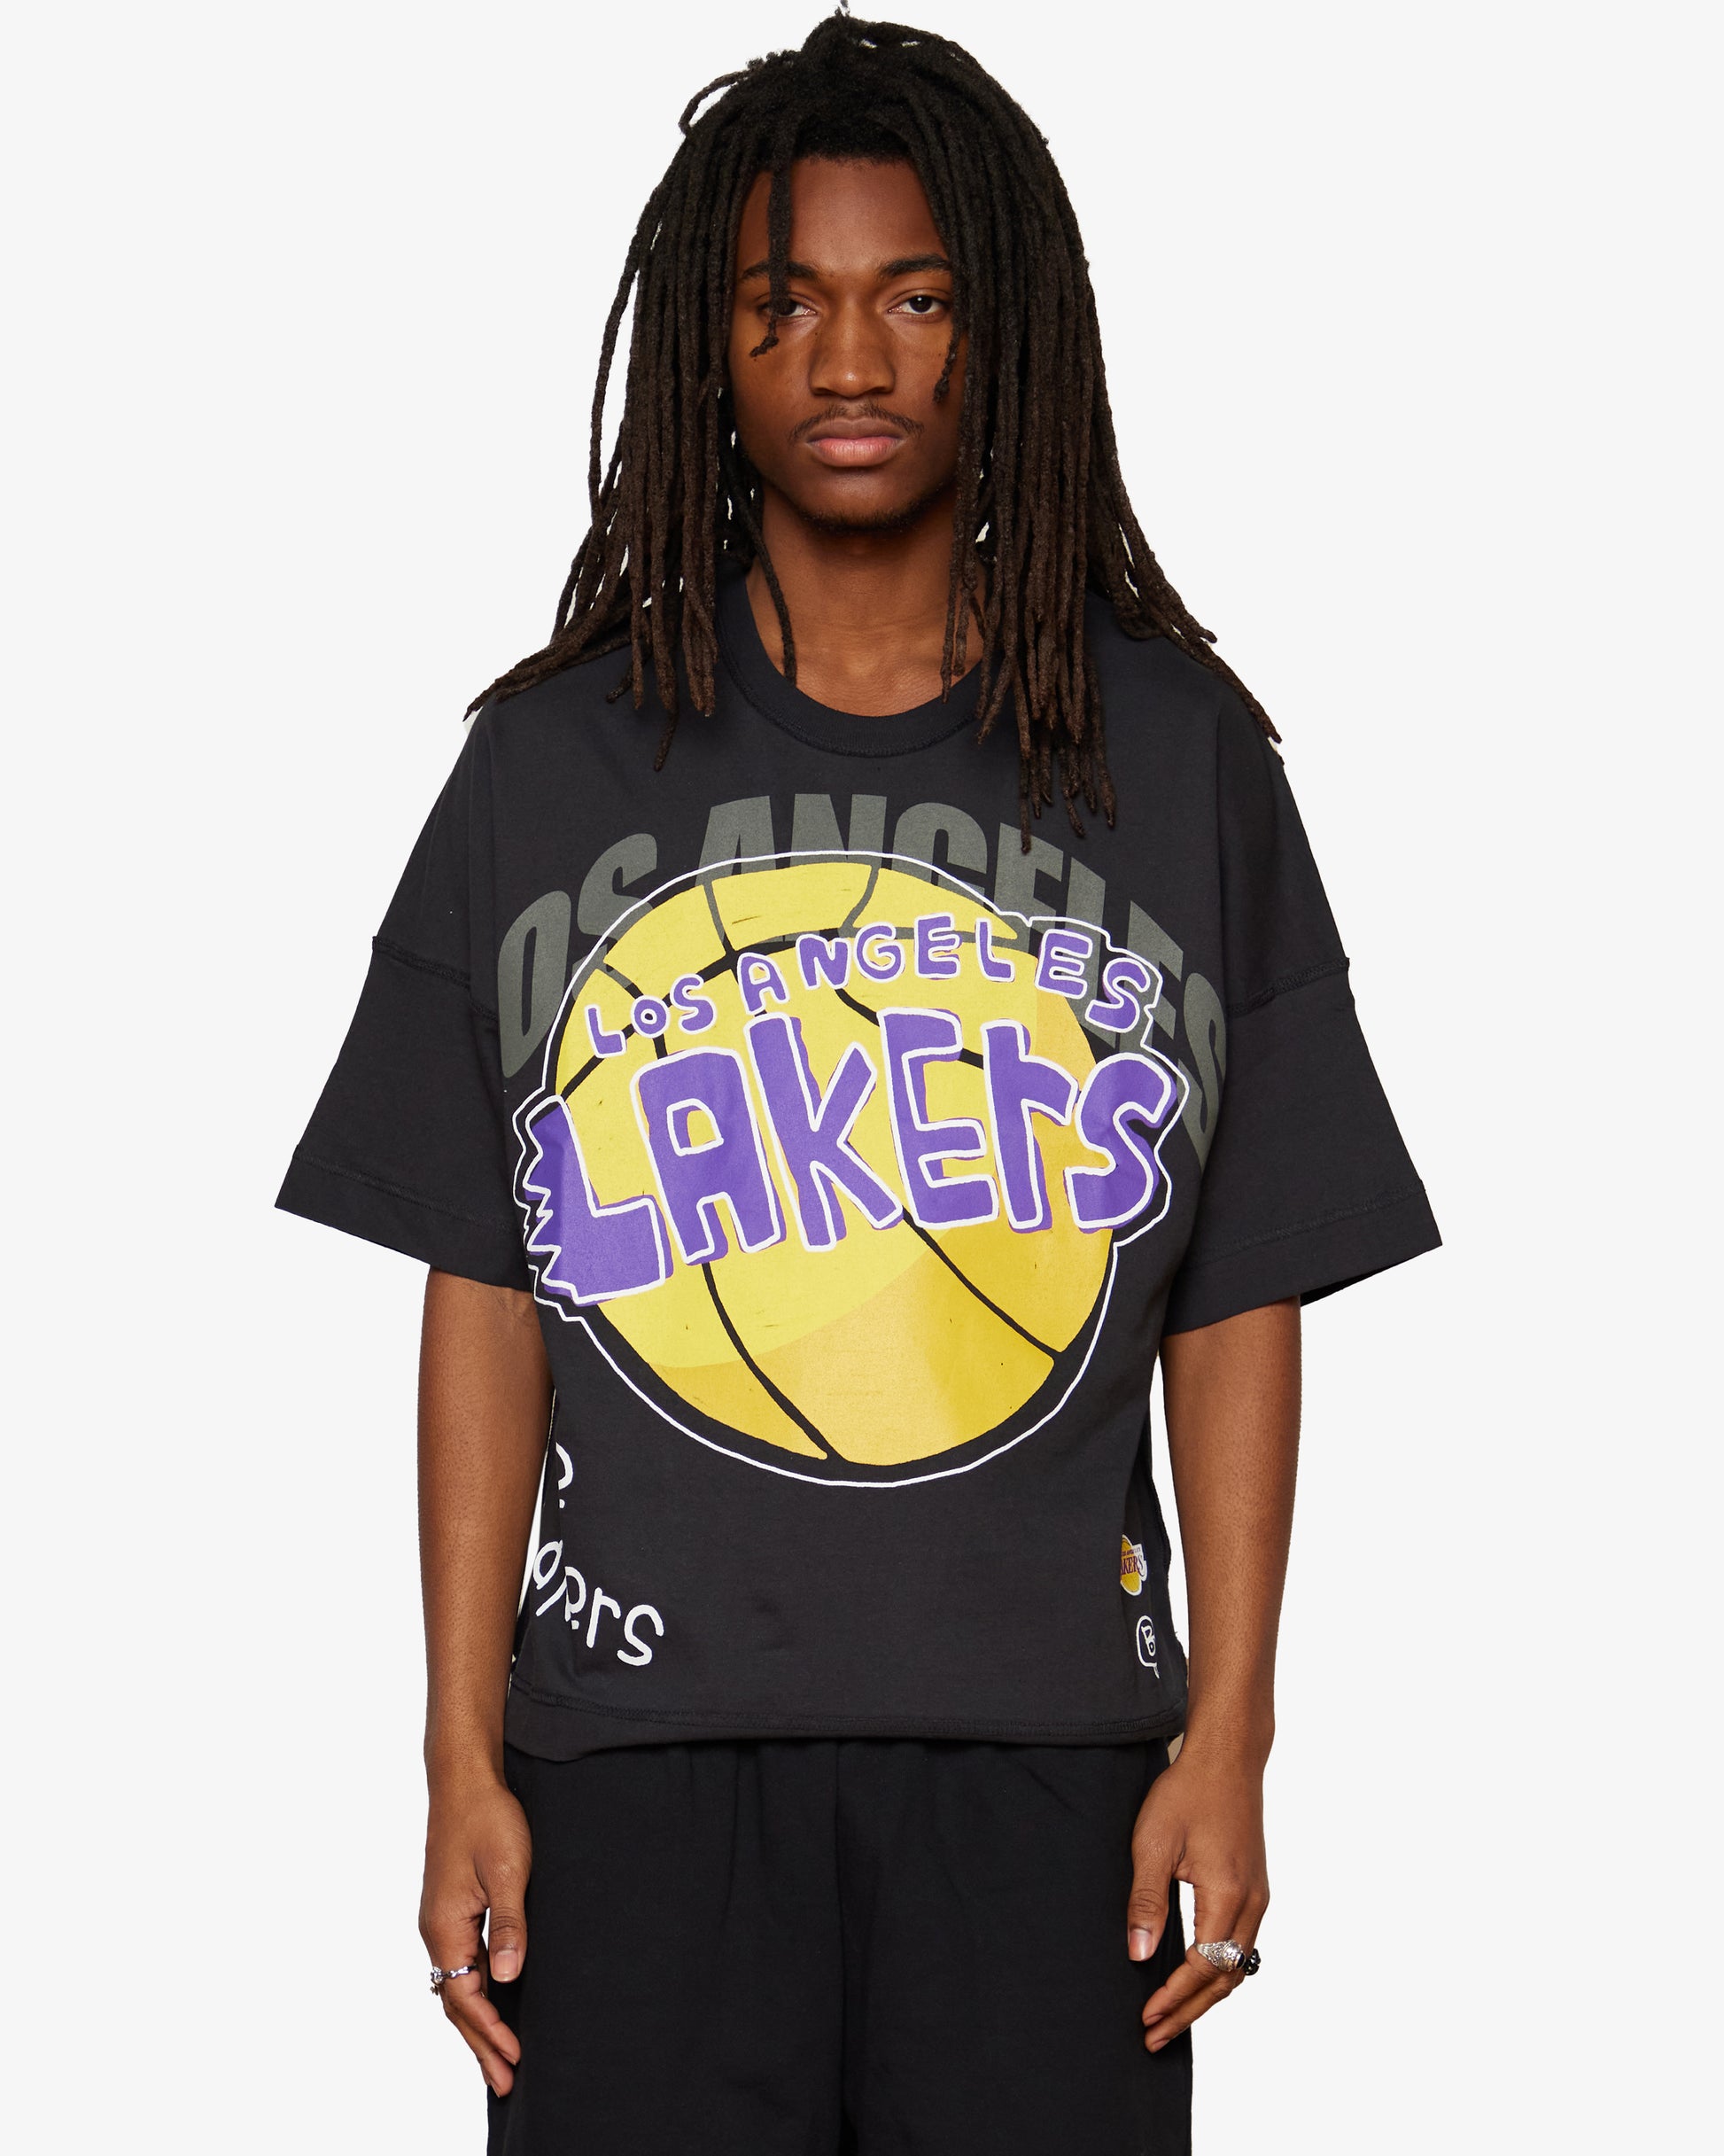 Los Angeles Lakers Sweatshirt Unisex Adult Size S to 2XL